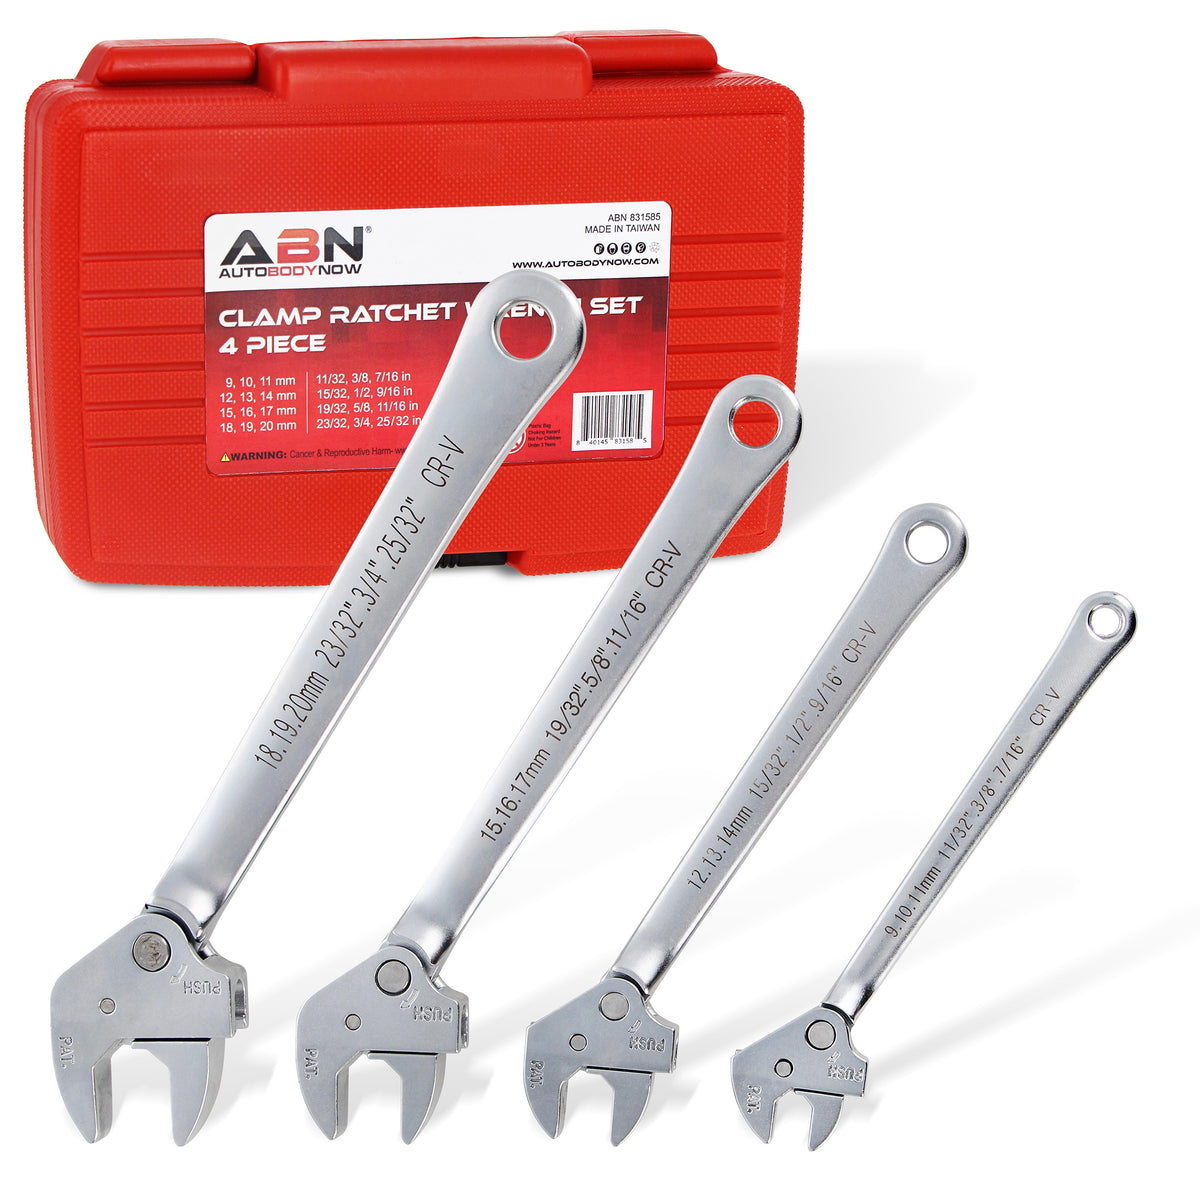 4pc Universal Wrench Set - Self Setting Spanner Wrench Set with Case